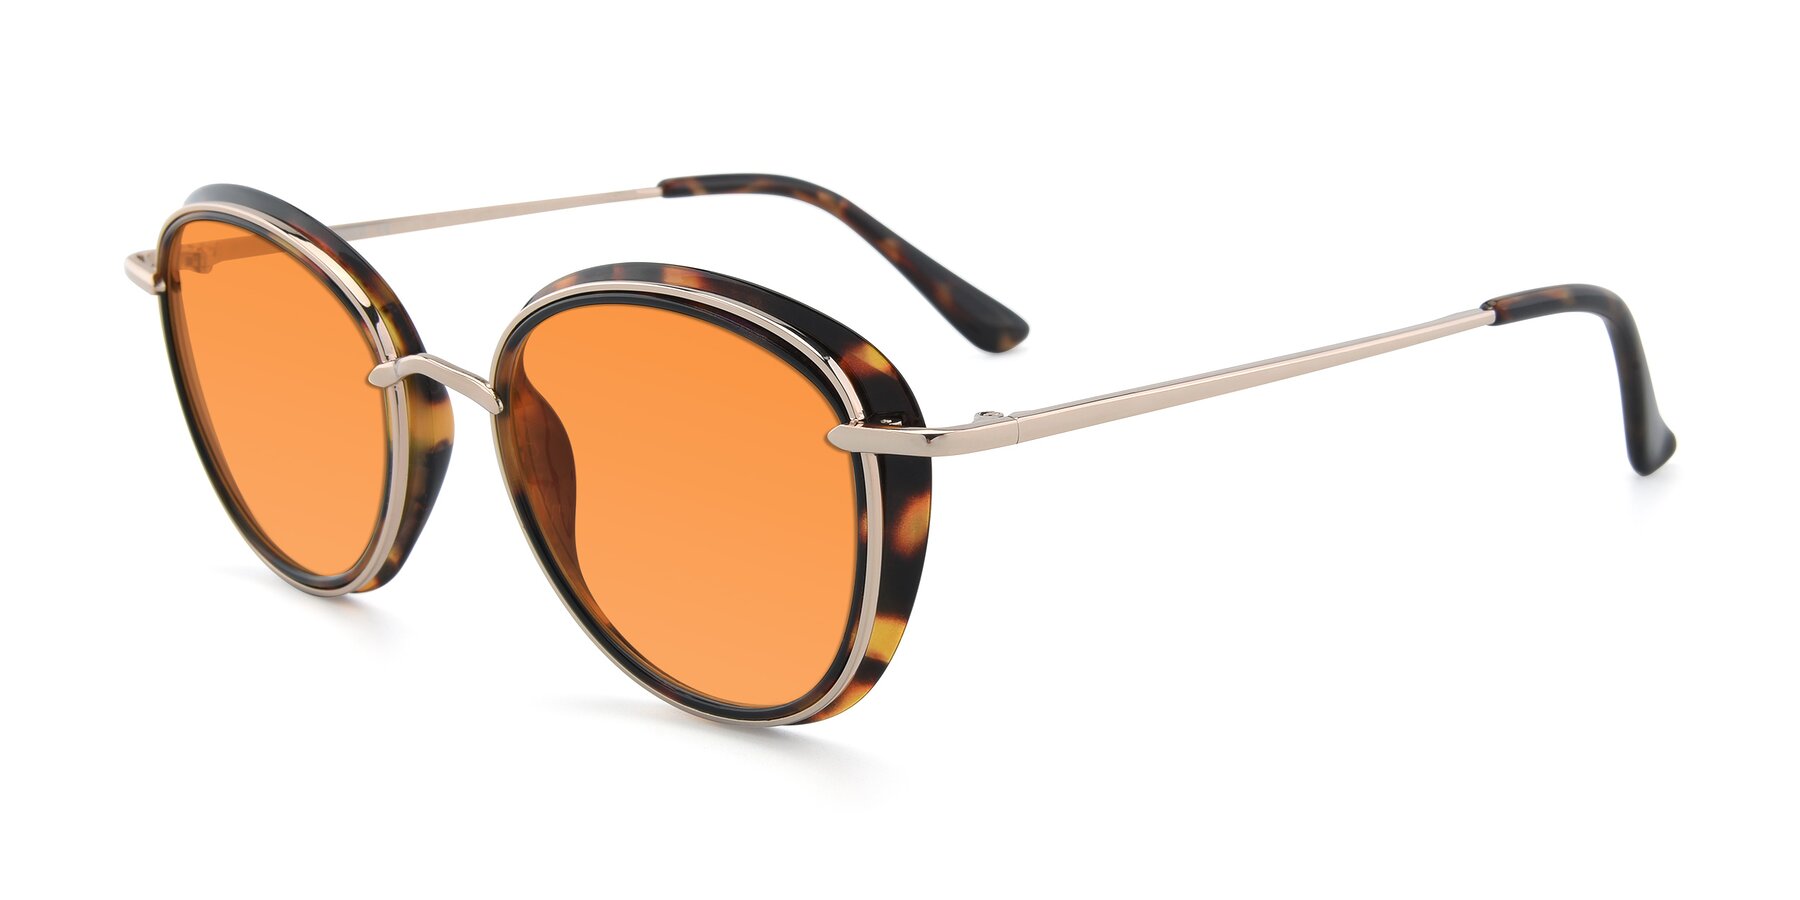 Angle of Cosmopolitan in Tortoise-Silver with Orange Tinted Lenses